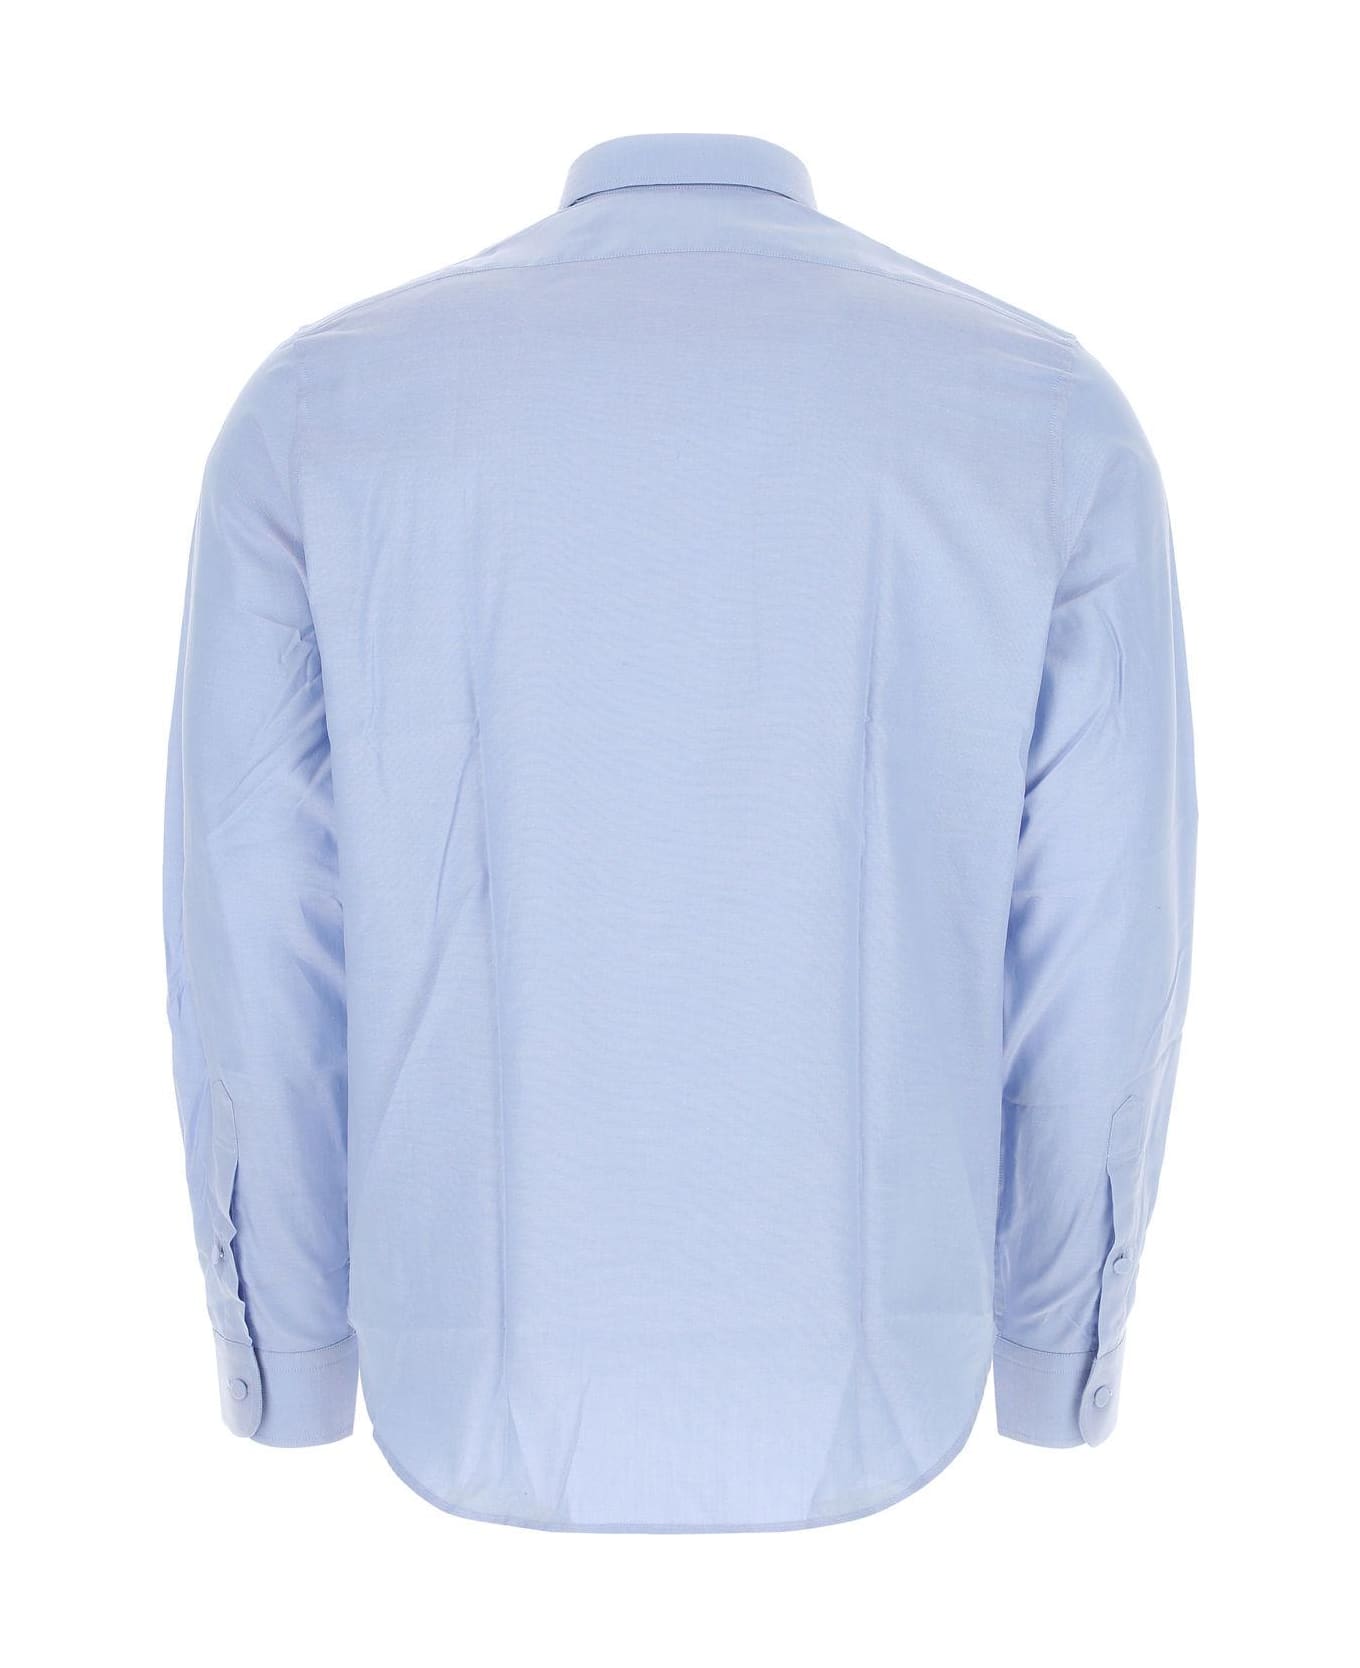 Gucci Shirt With Pocket - Blue